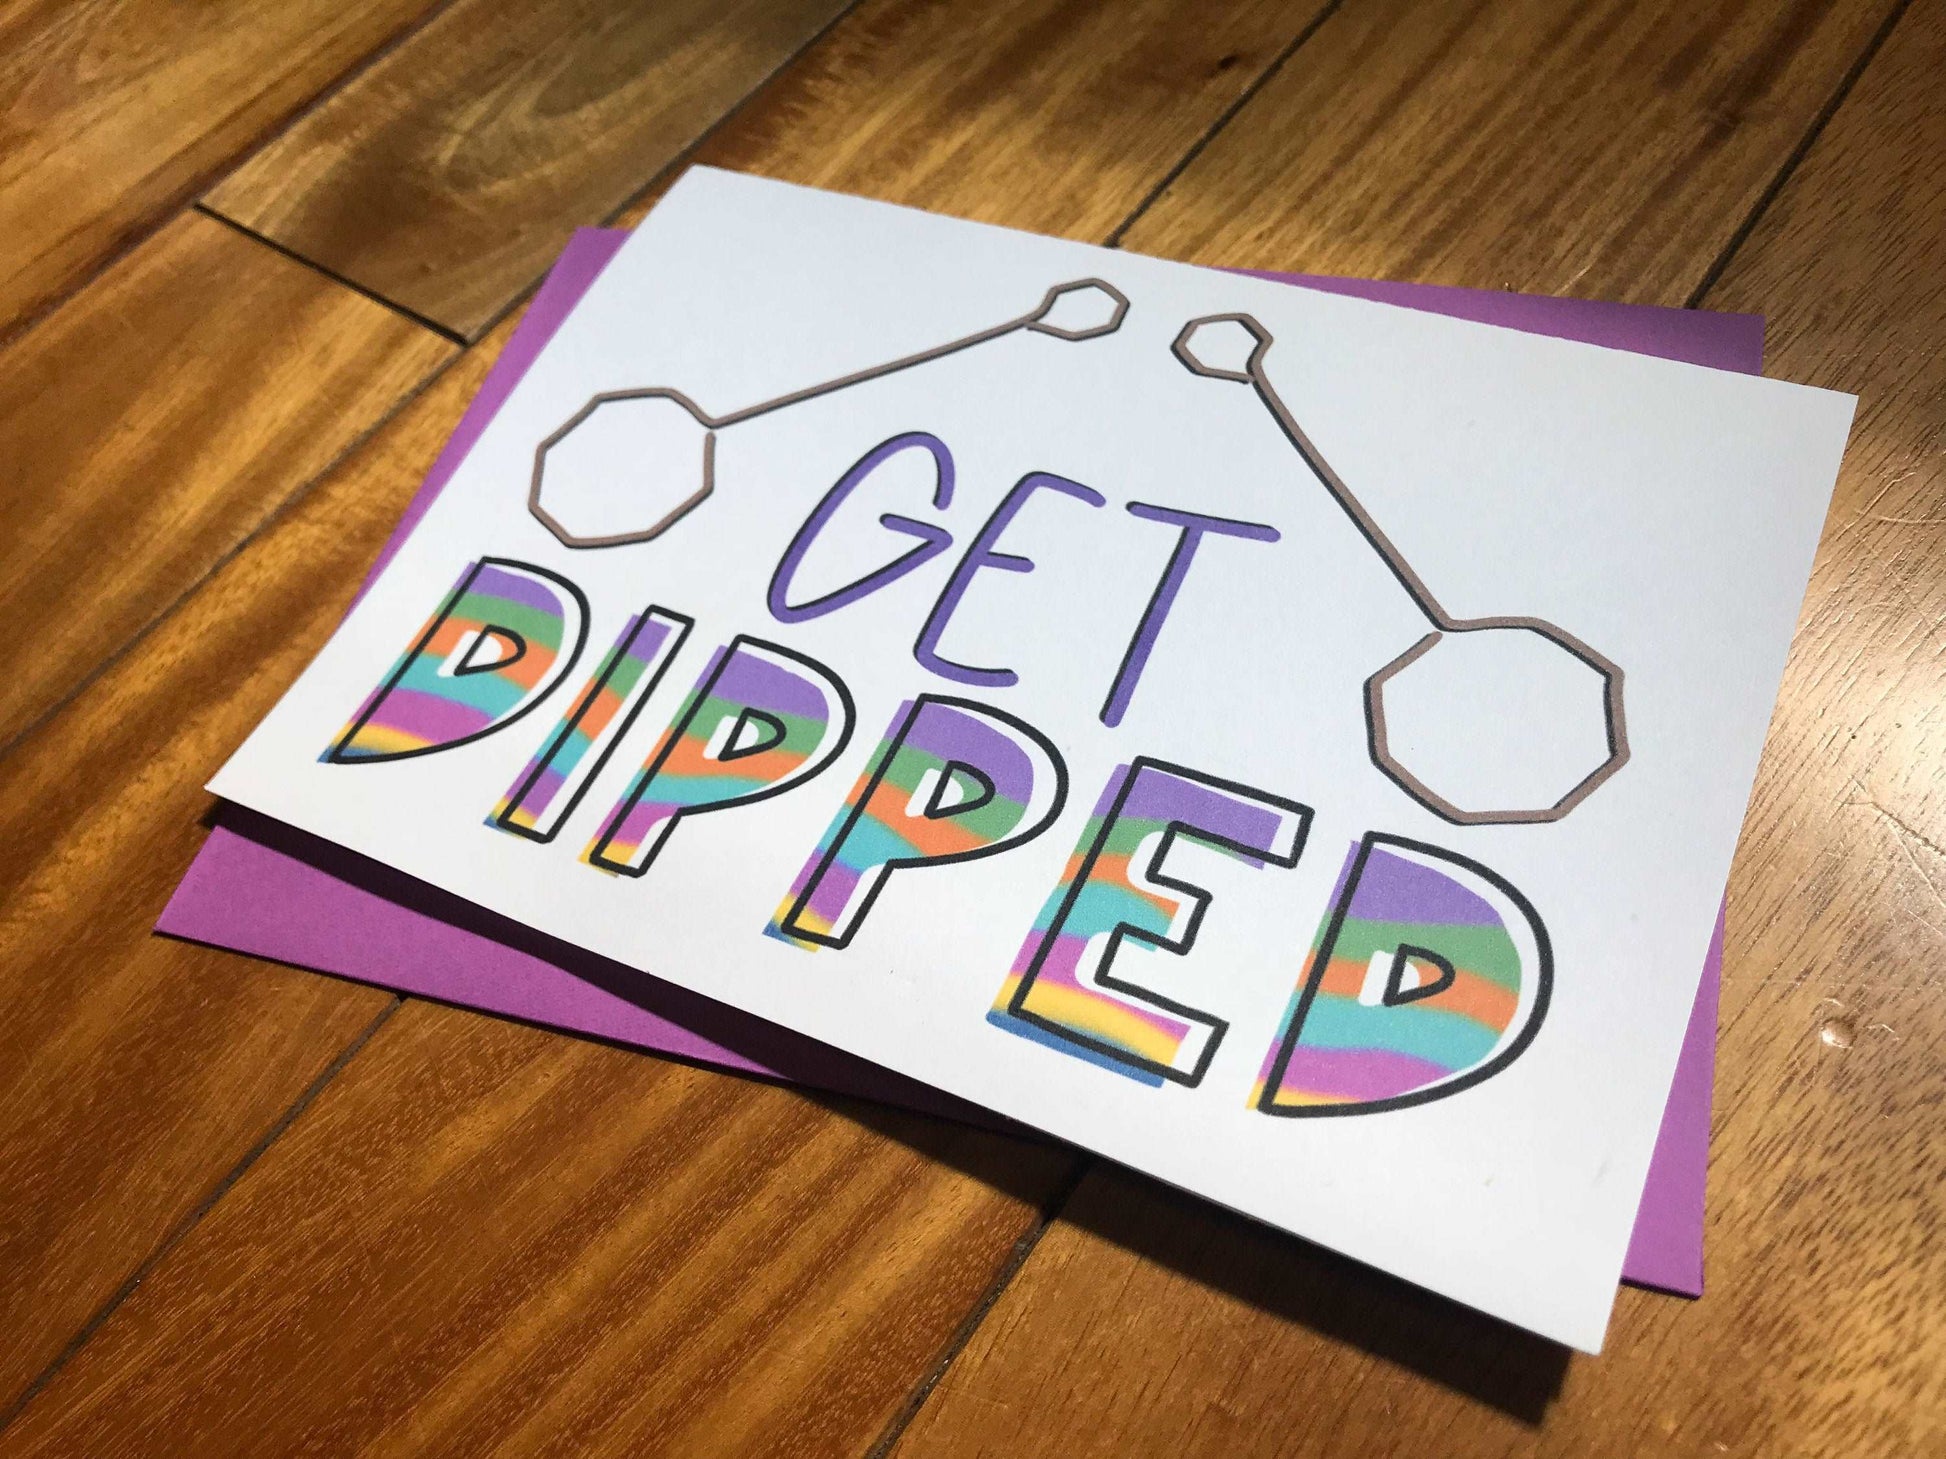 Get Dipped Colored Eggs Funny Handmade Easter Card by StoneDonut Design